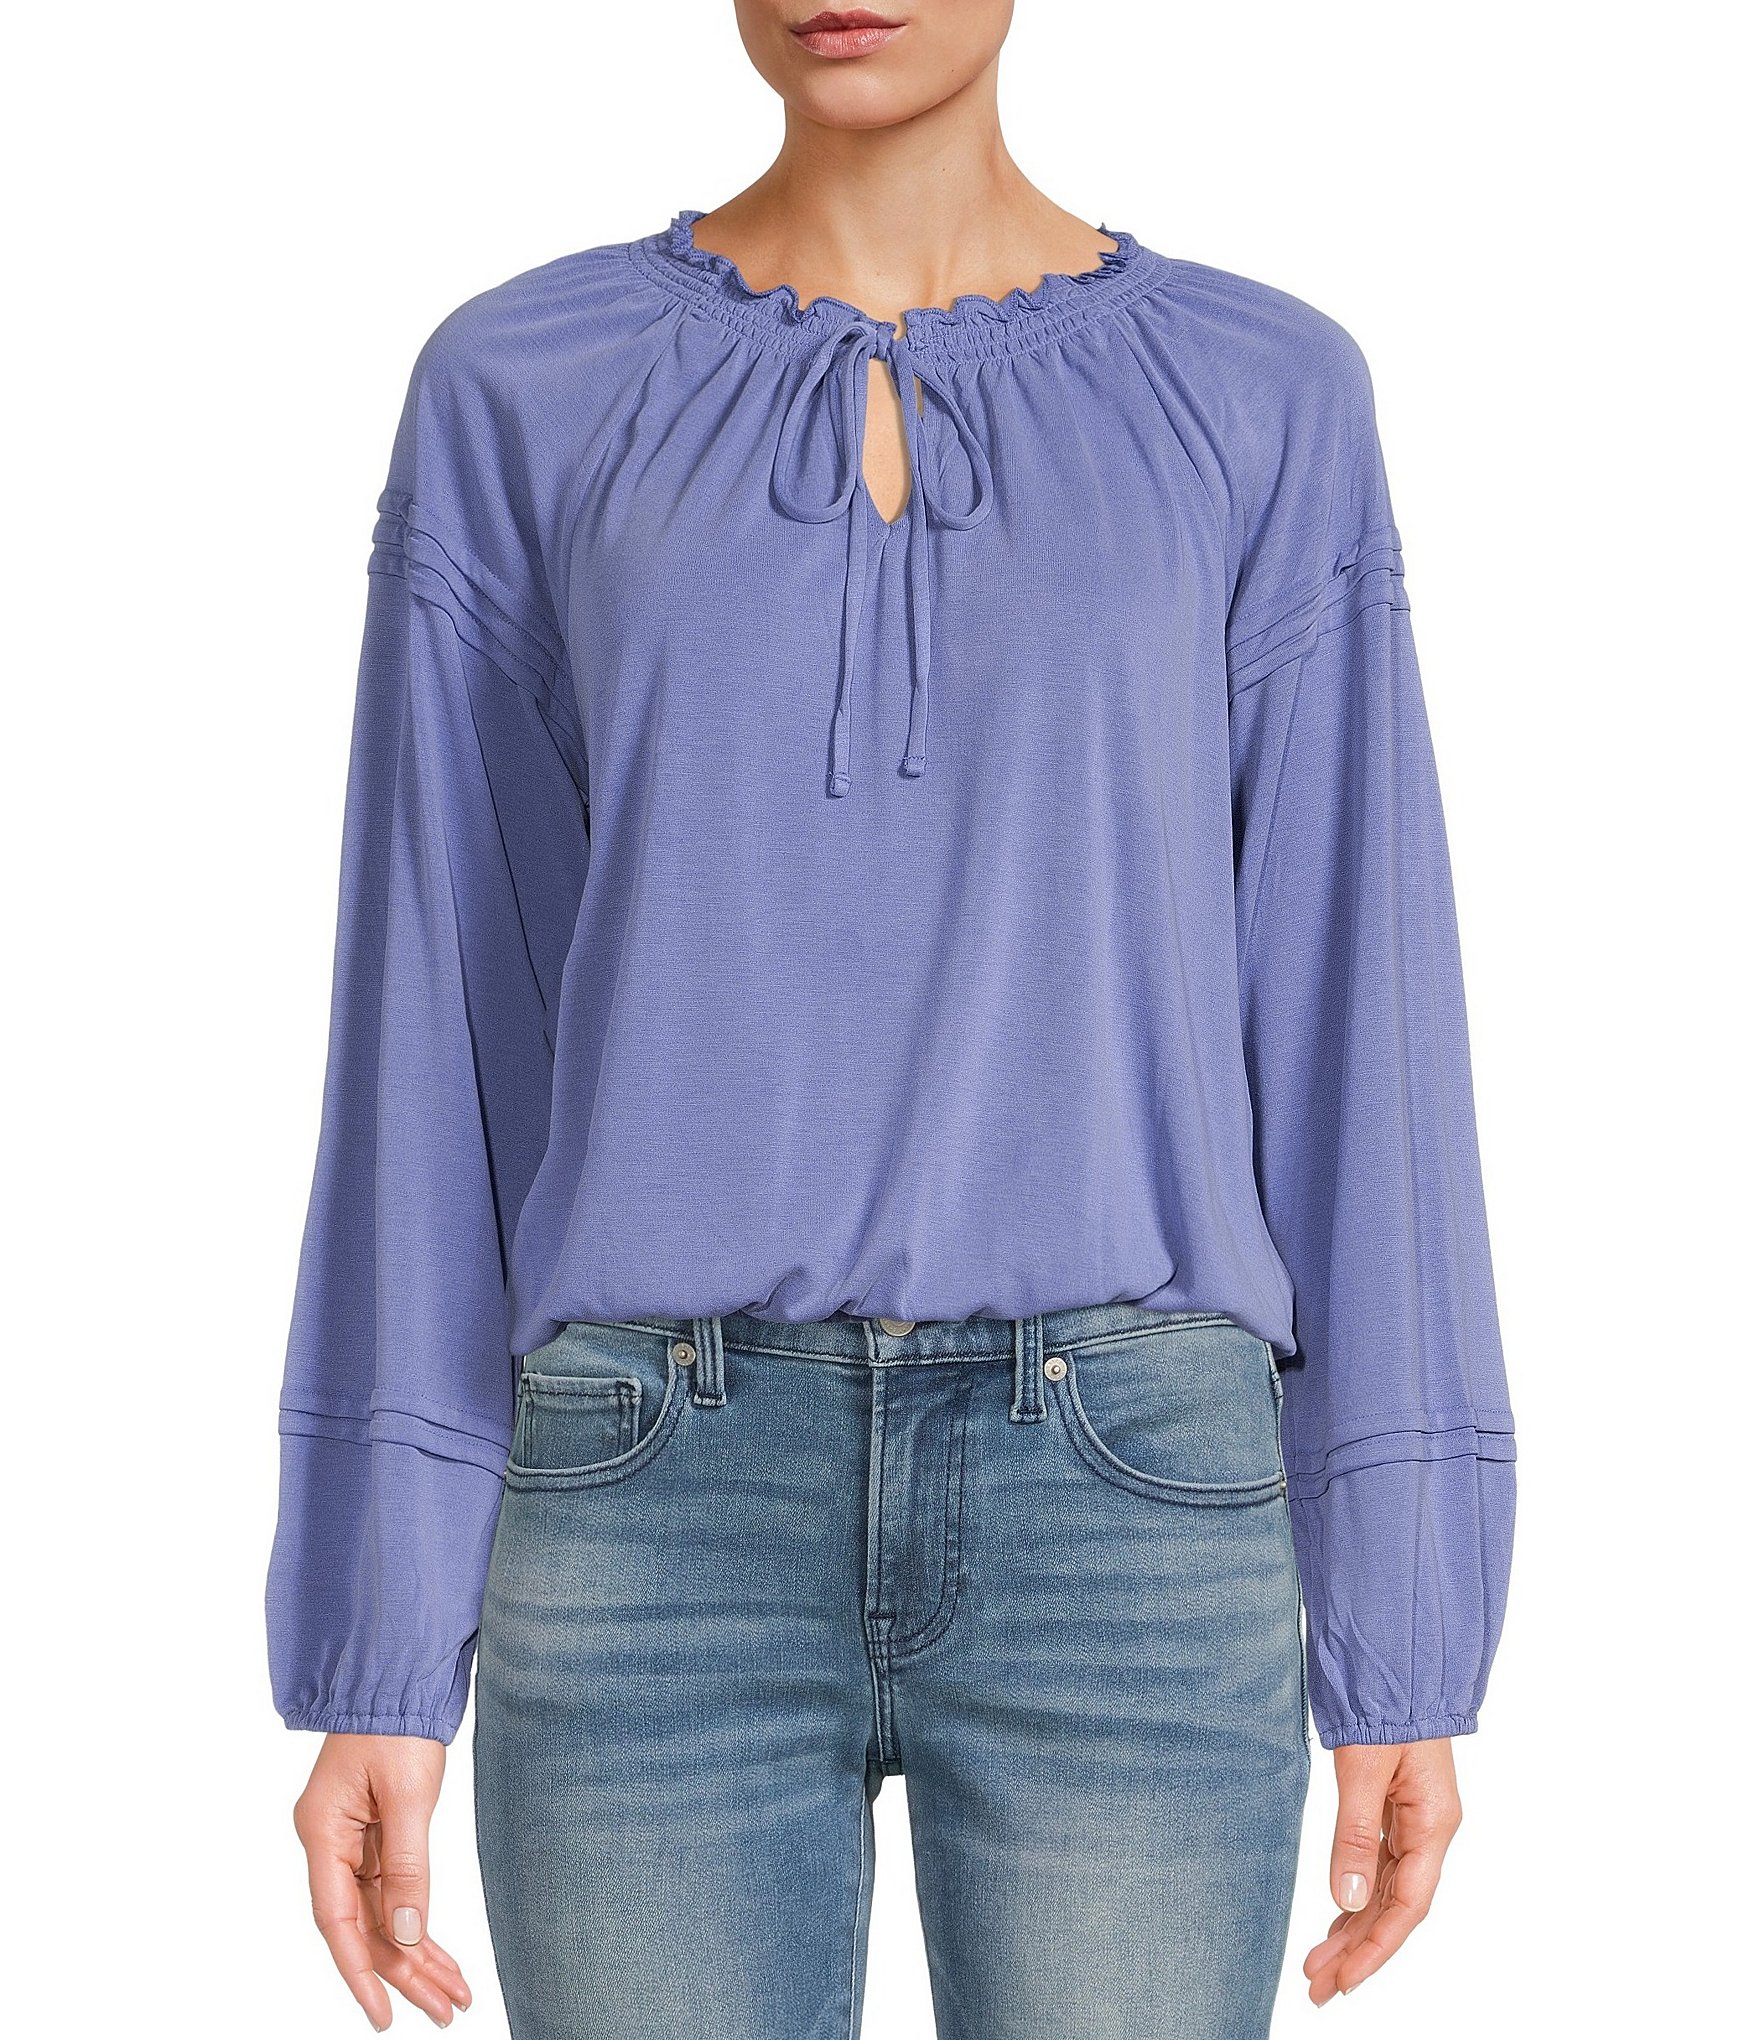 Women's Lucky Brand Long Sleeve Blouses gifts - at $65.27+